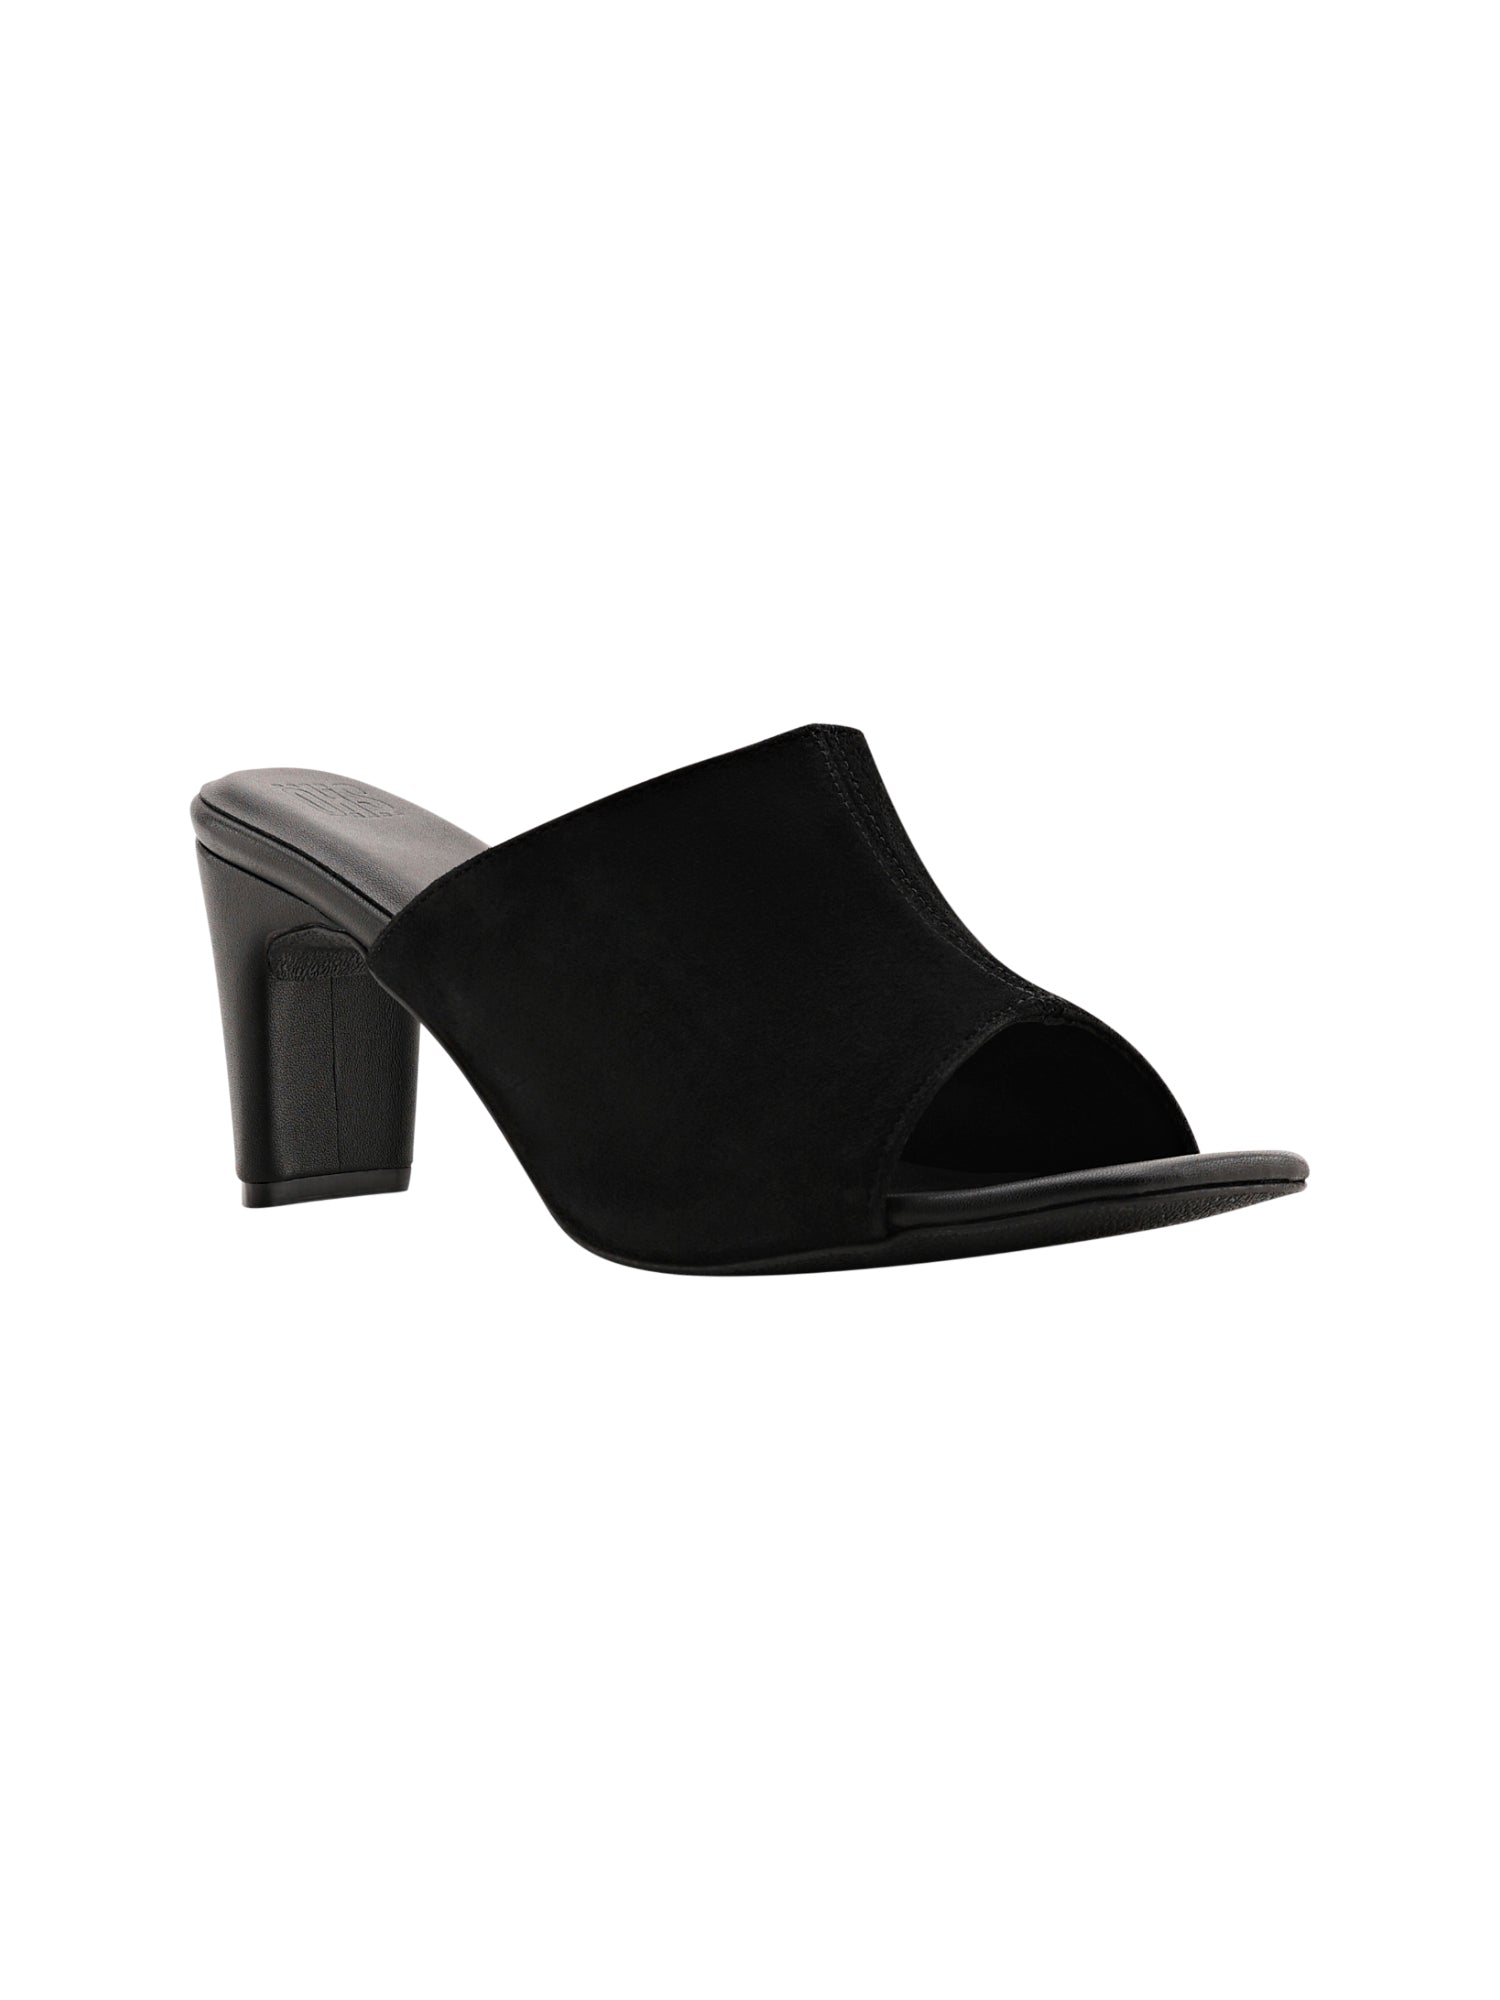 Black Suede Mules For Women